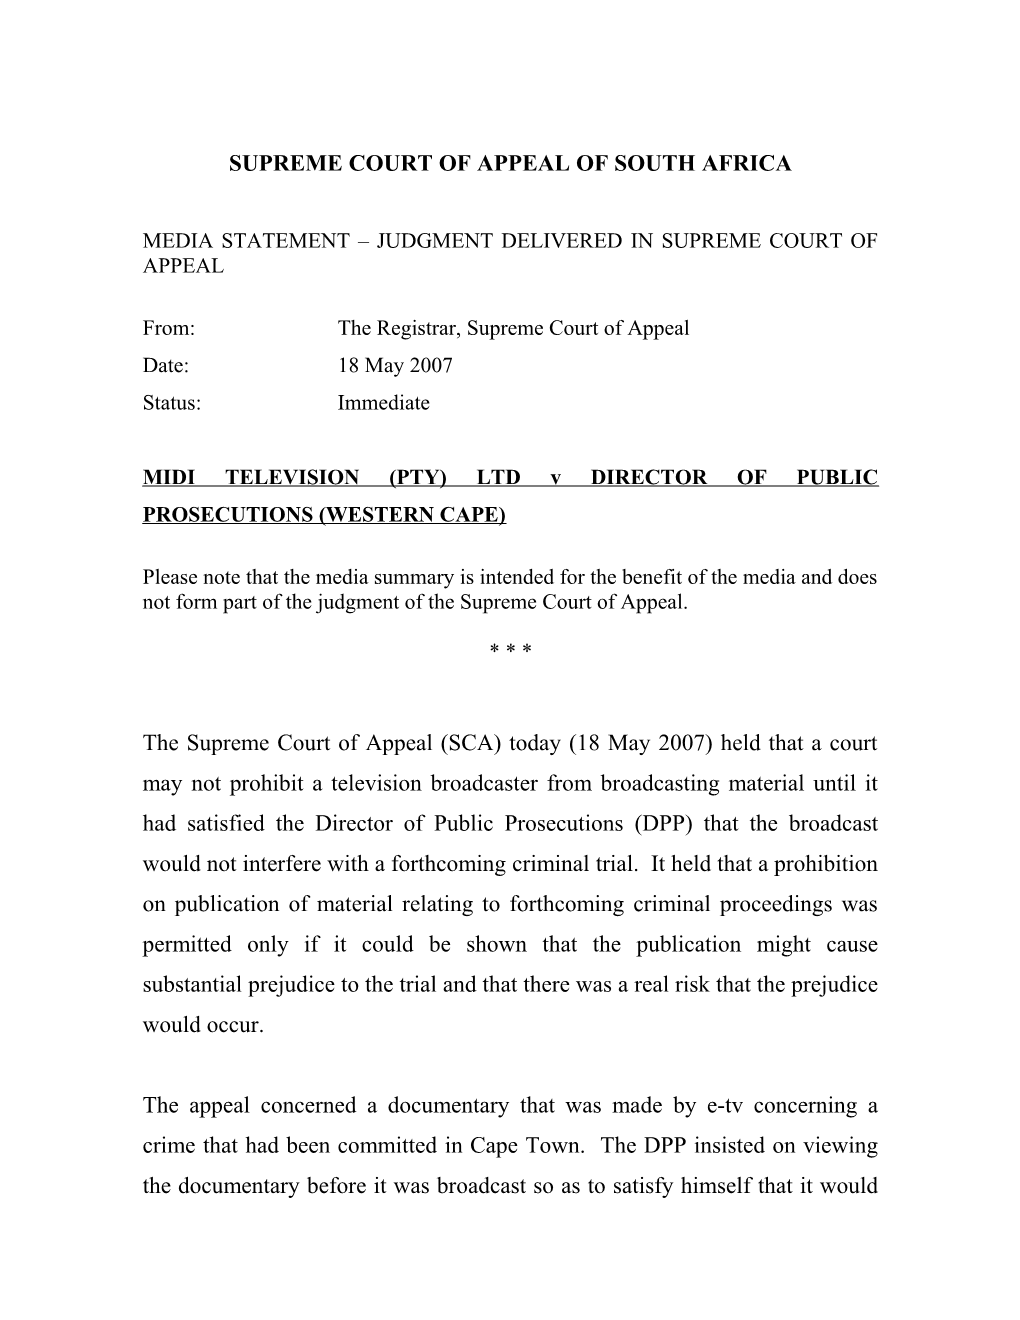 The Supreme Court of Appeal (SCA) Today ( ) Held That a Court May Not Prohibit a Television